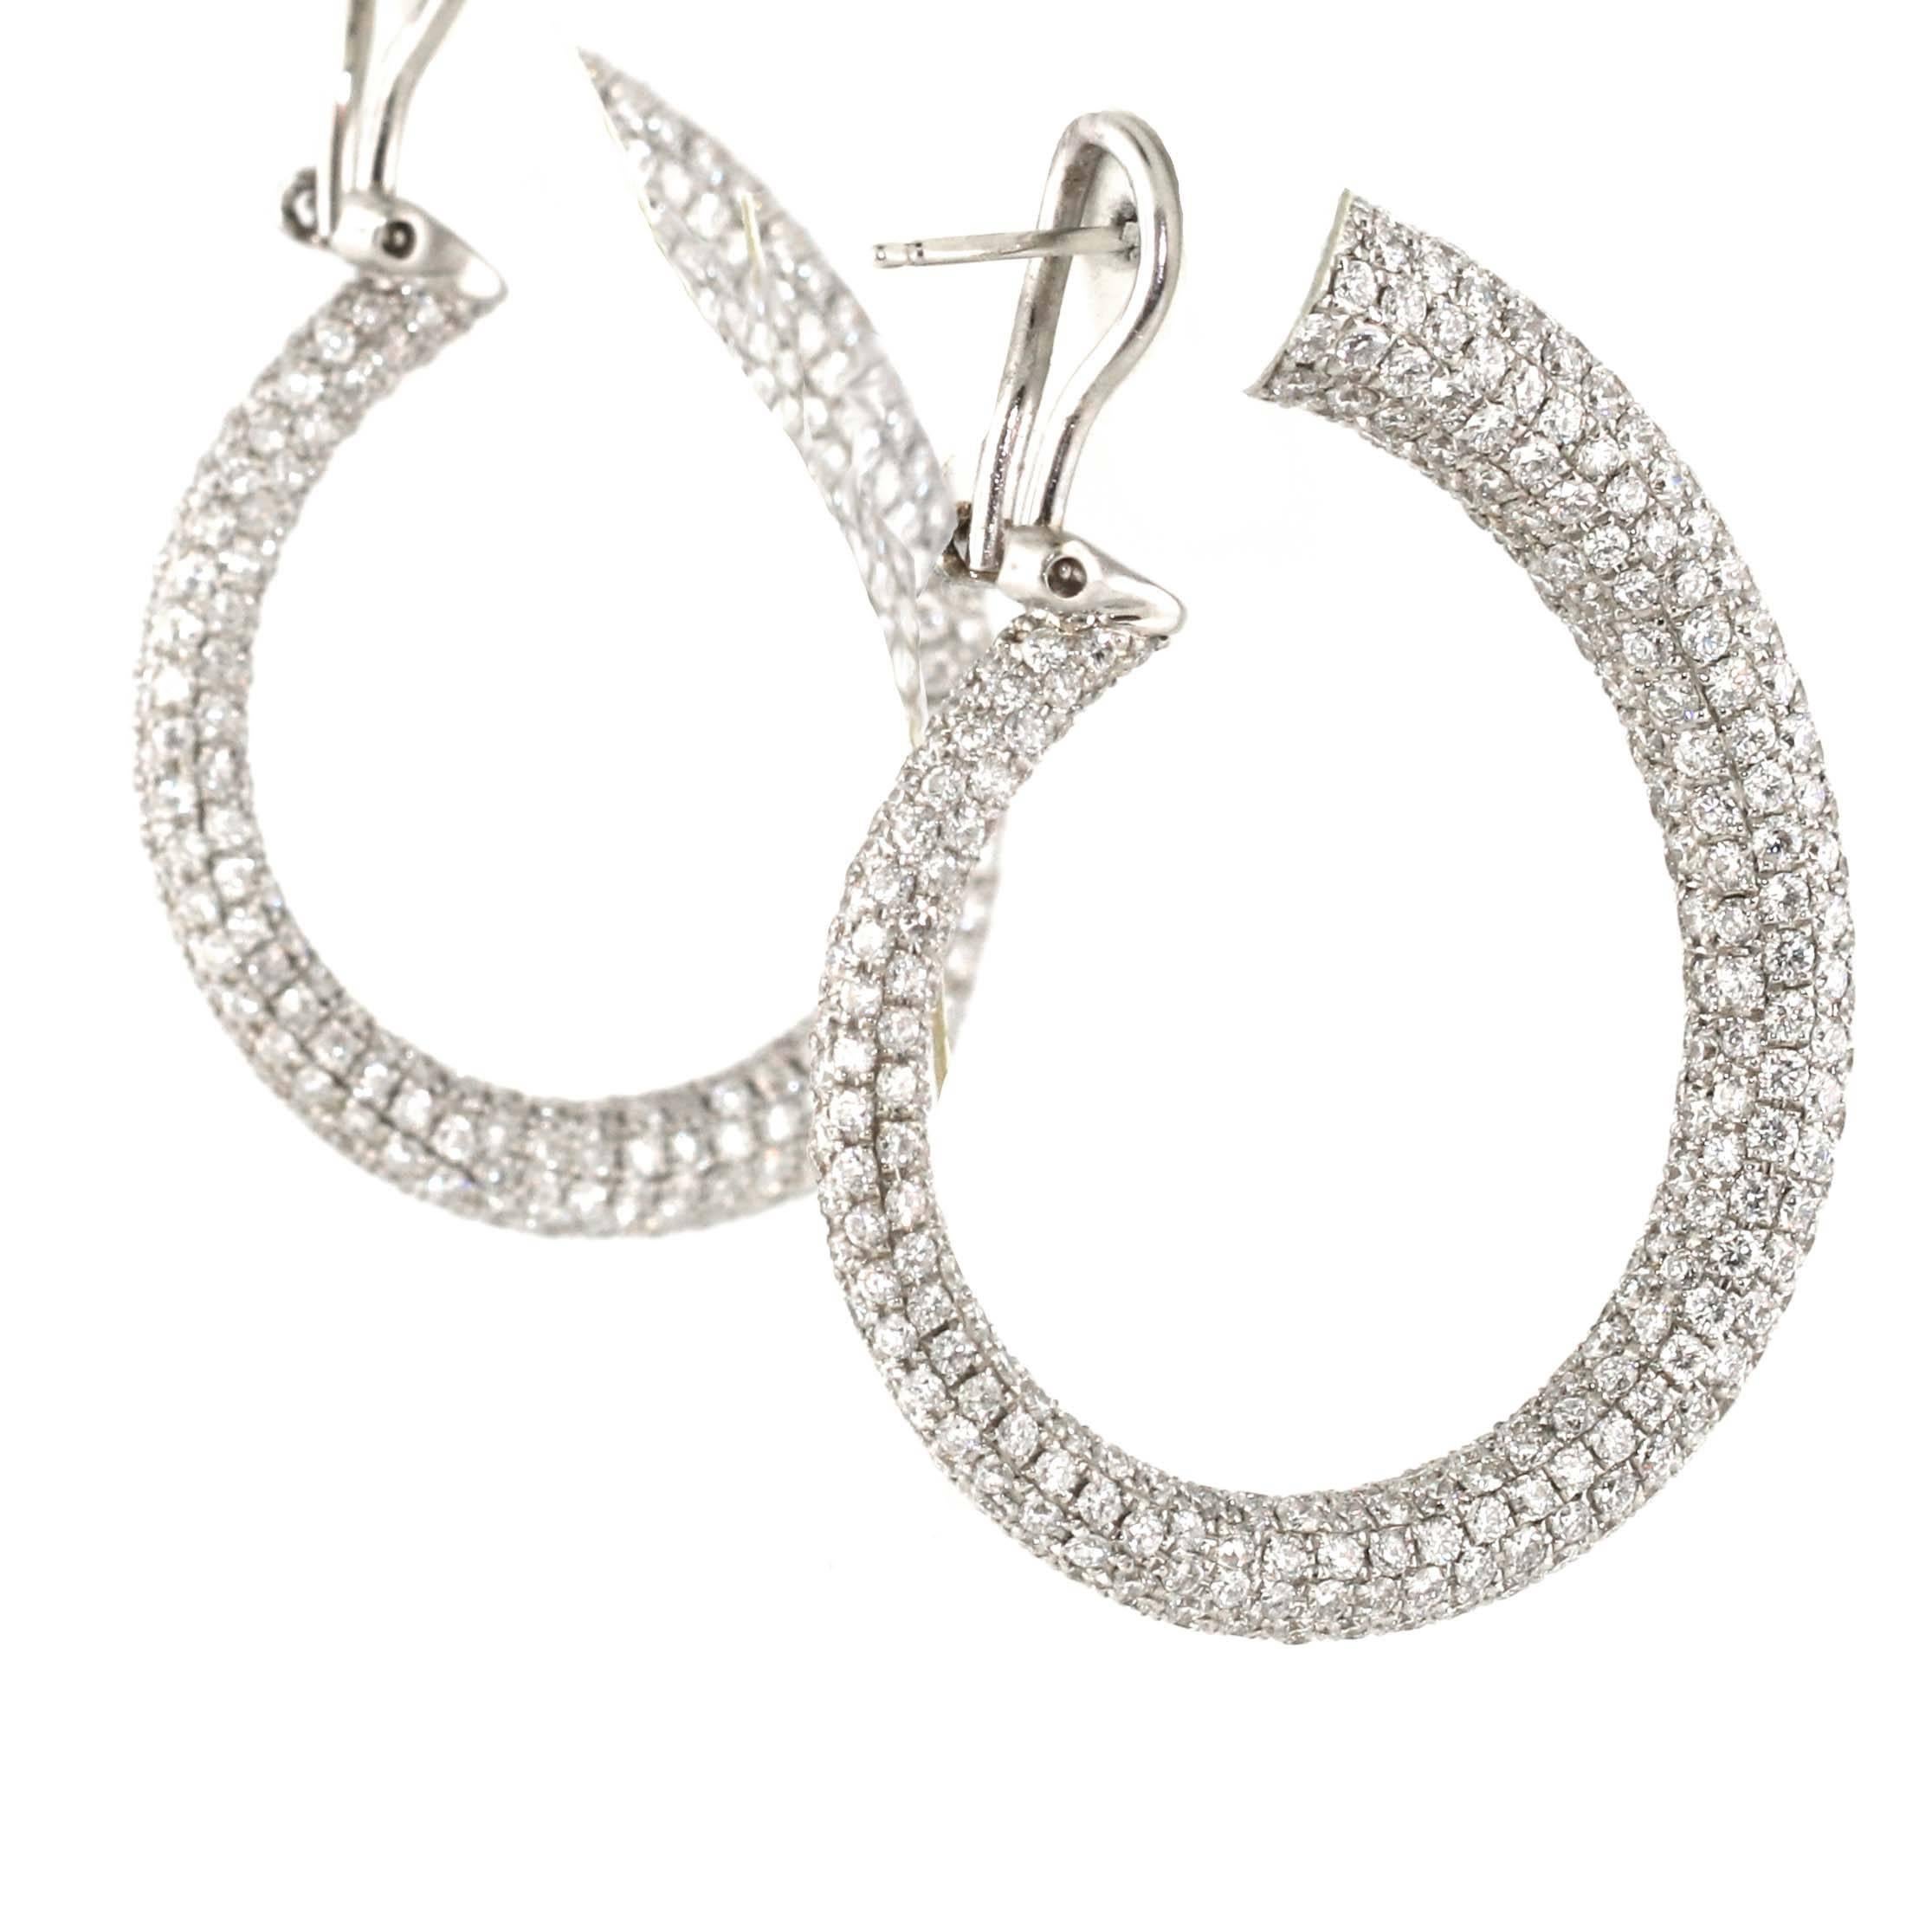 Round Cut 13.20 Carat White Diamond Hoops Earrings, Full Pave, Inside/Out